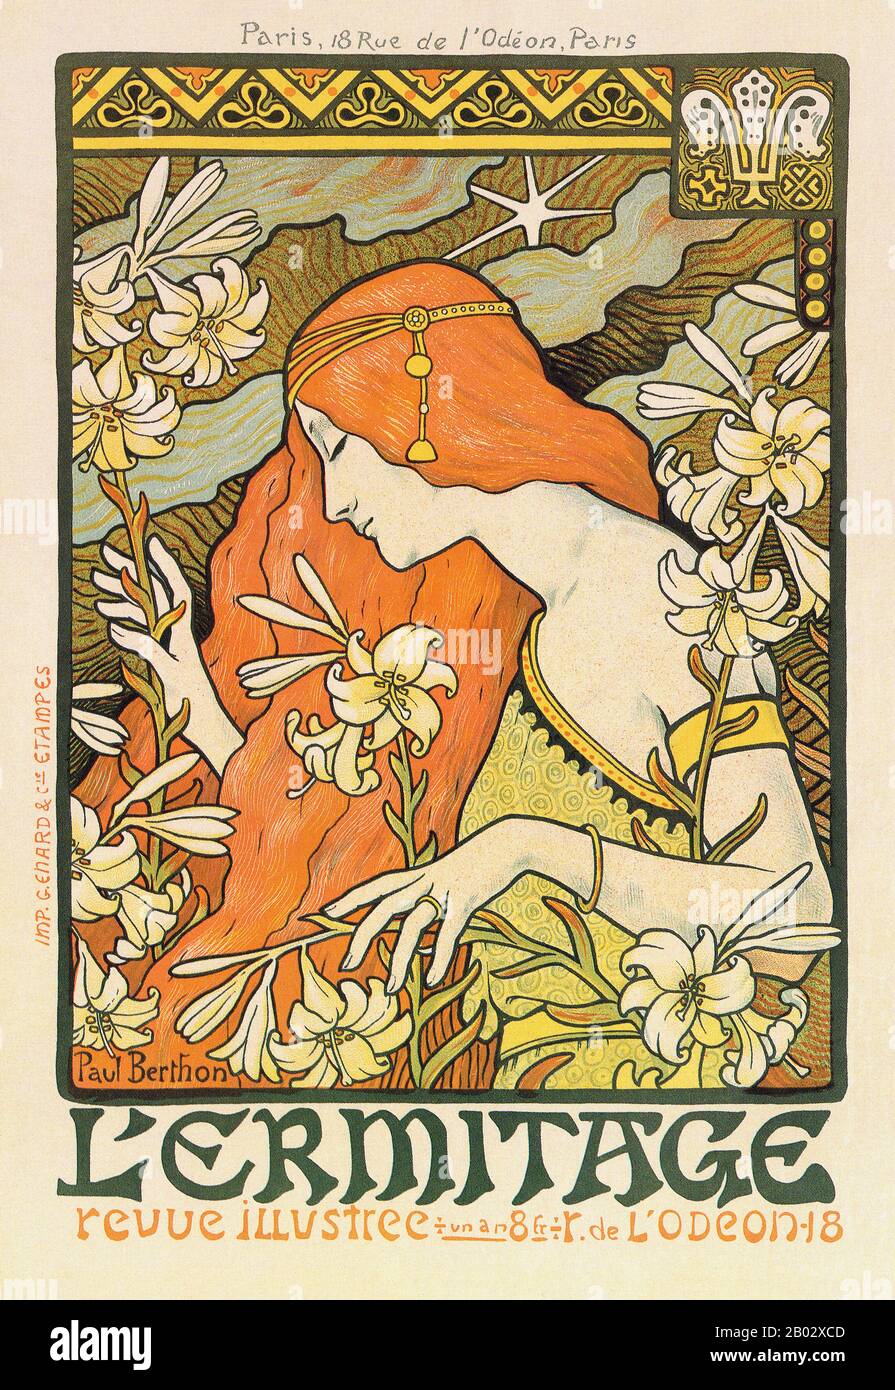 Paul Emile Berthon (1872–1909) was a French artist who produced primarily posters and lithographs. Berthon's work is in the style of Art Nouveau, much like his contemporary Alphonse Mucha. Berthon studied as a painter in Villefranche before moving to Paris. He later enrolled at the Ecole Normale d'Enseignement de Dessin and received lessons from Luc-Olivier Merson.  His study of the decorative arts influenced his print making, influencing the strong lines and natural details that guided his art. Stock Photo